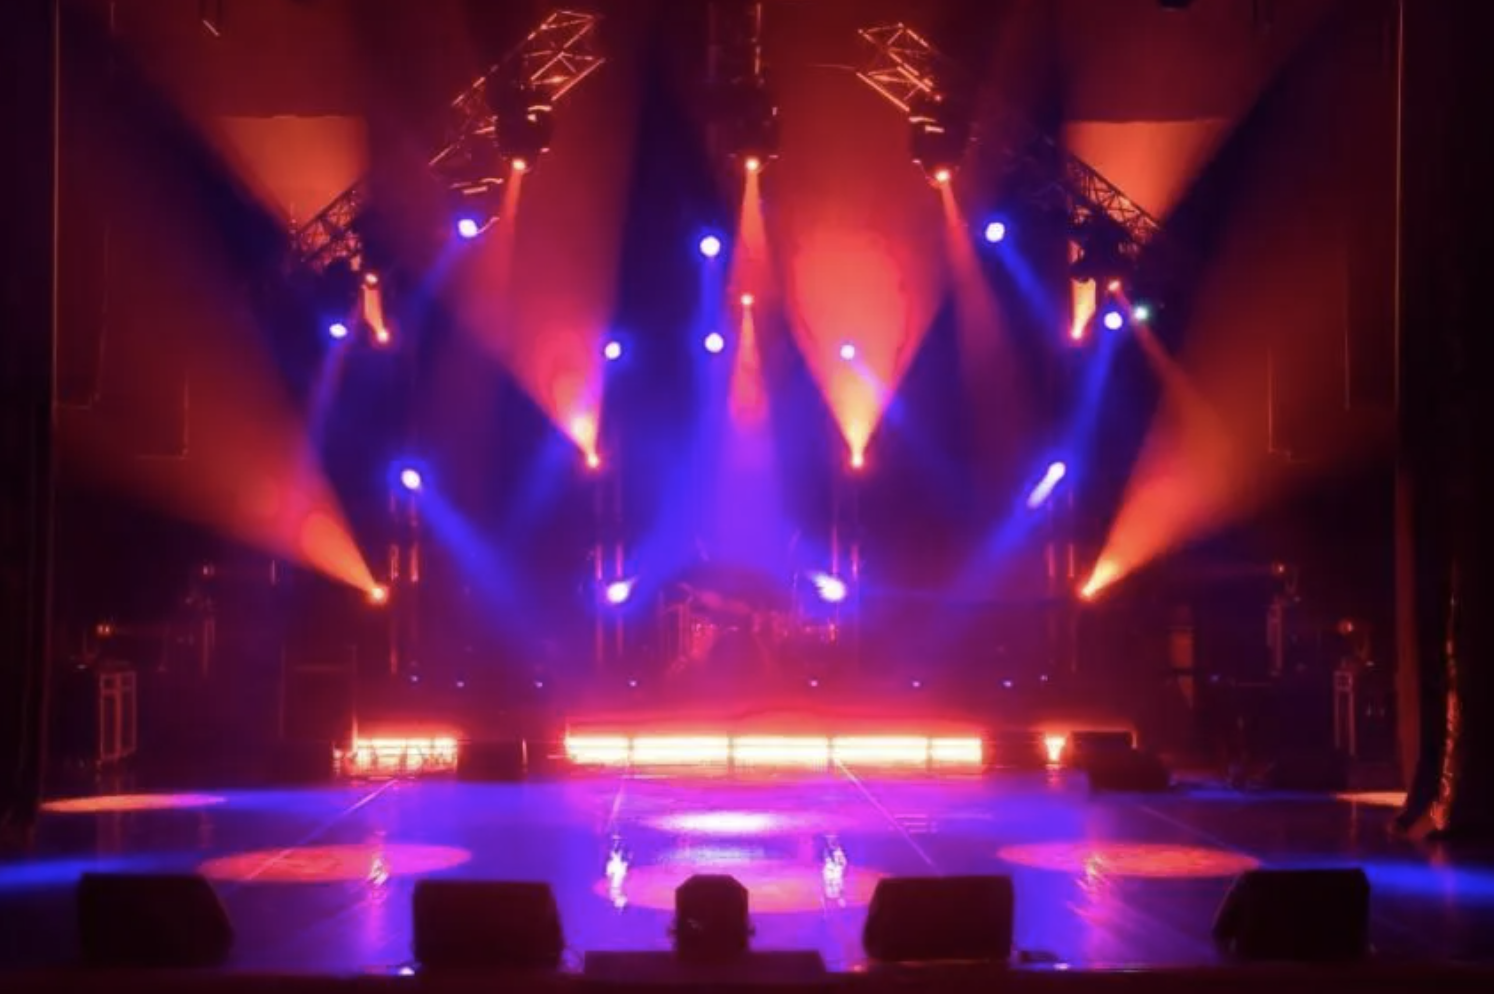 Image of concert with red and blue lights